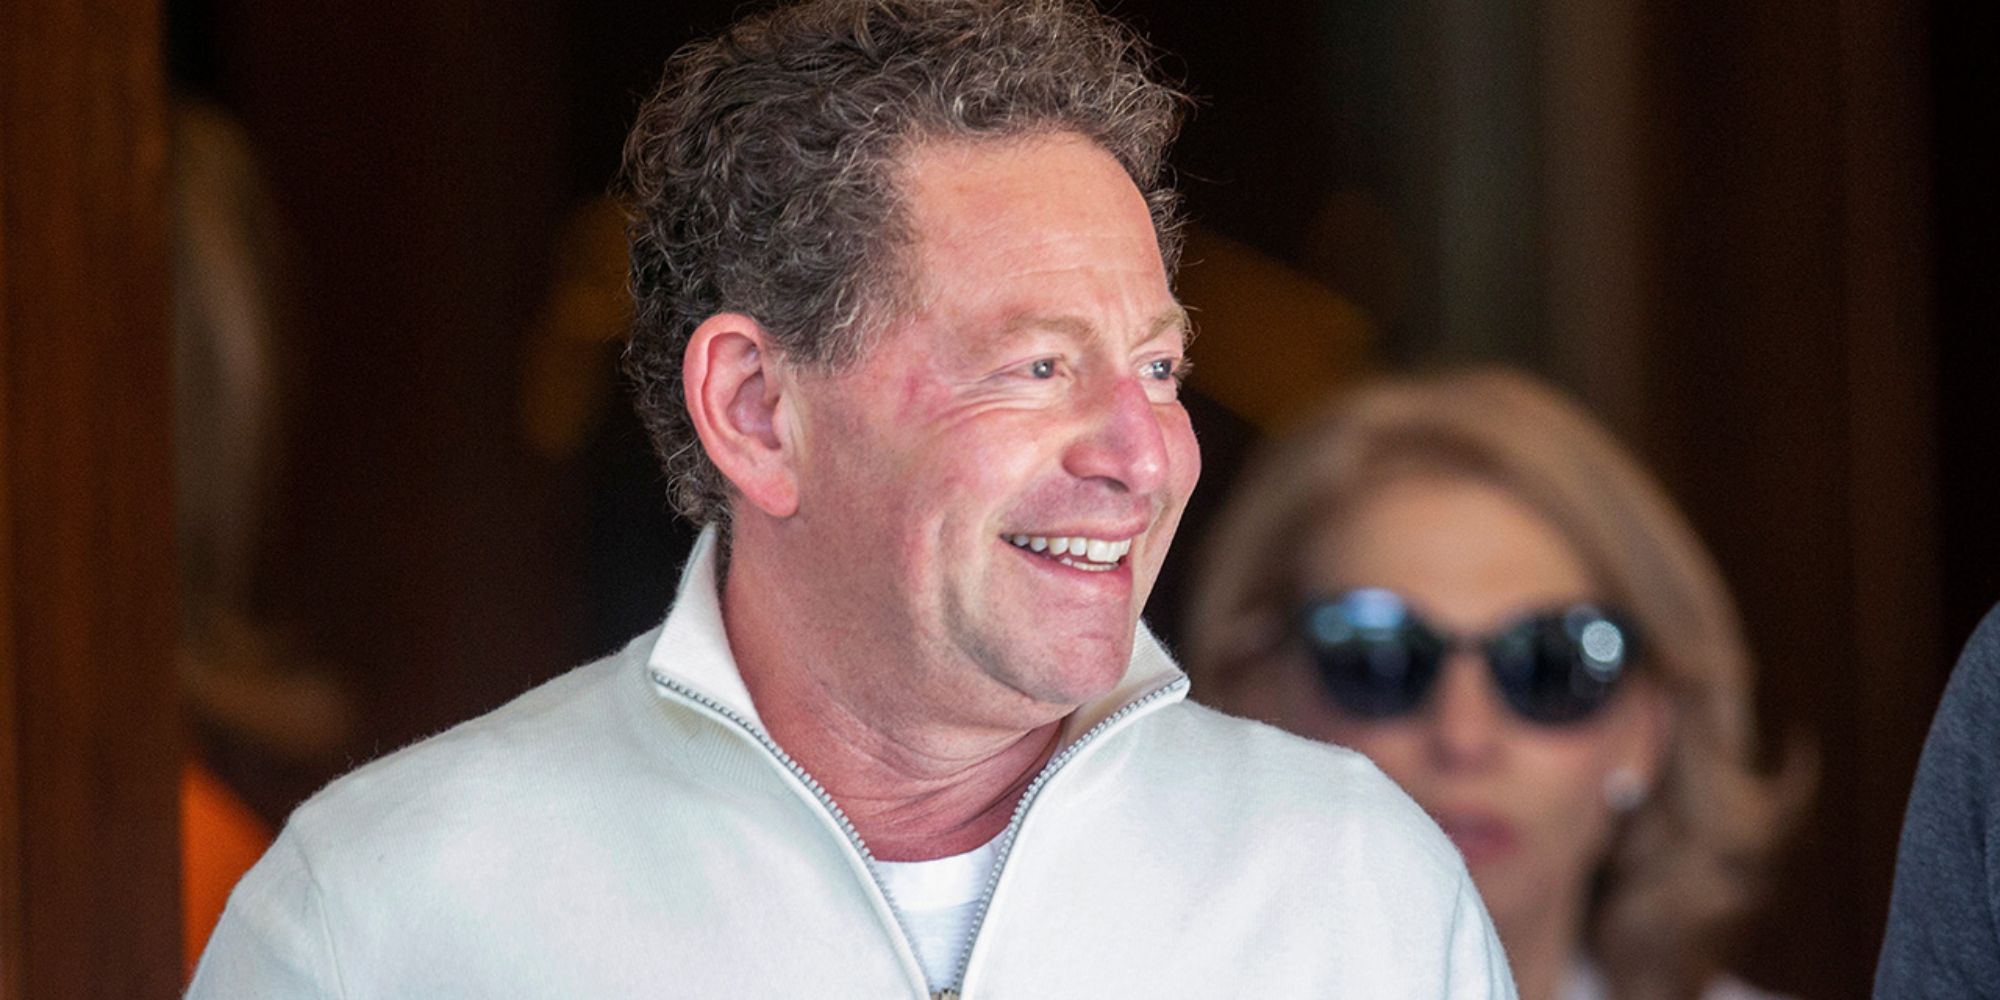 Activision's Bobby Kotick Will Likely Stay Following the Aquisition